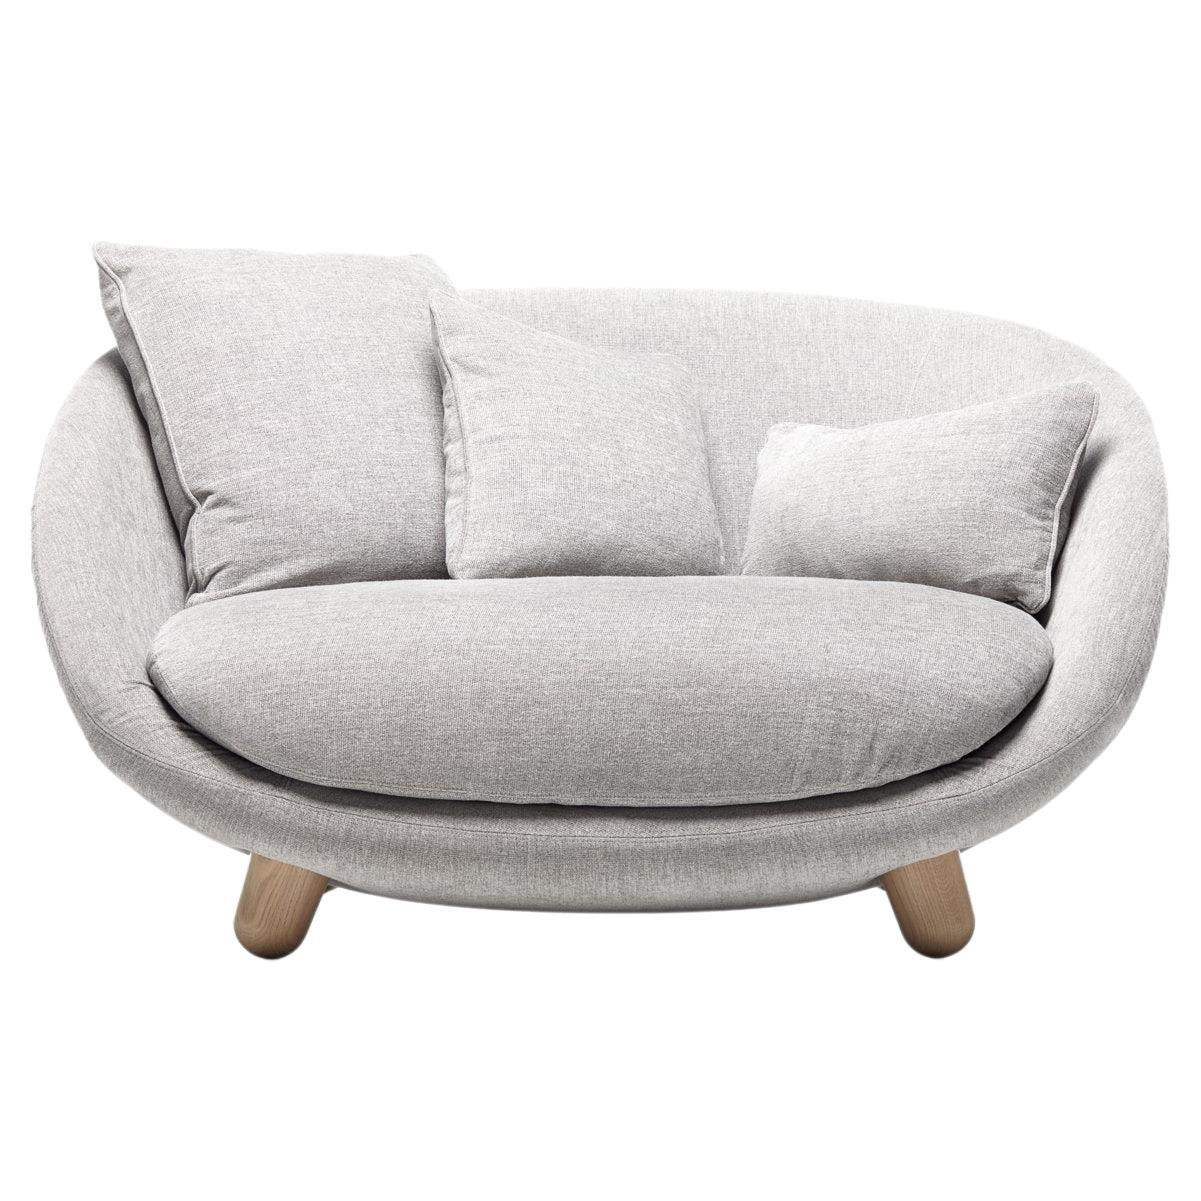 Moooi Love Sofa in Liscio, Nebbia Upholstery & White Wash Stained Legs For Sale